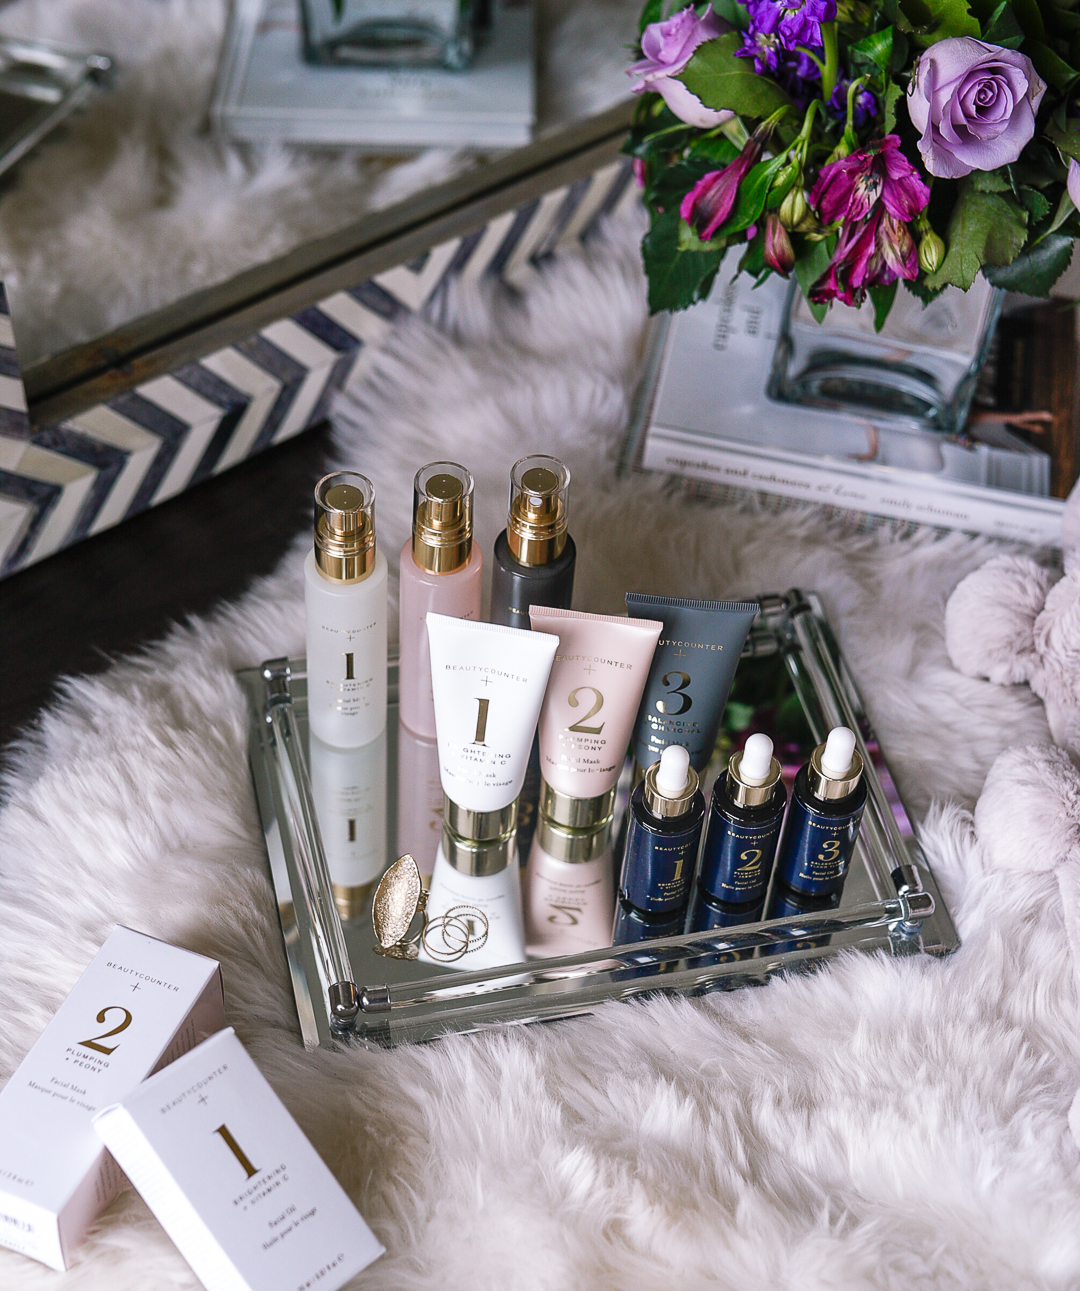 Face mist, face mask, and face oil for healthy, glowing skin. - Why this Beautycounter Products Deal is Worth It by popular Chicago beauty blogger Visions of Vogue